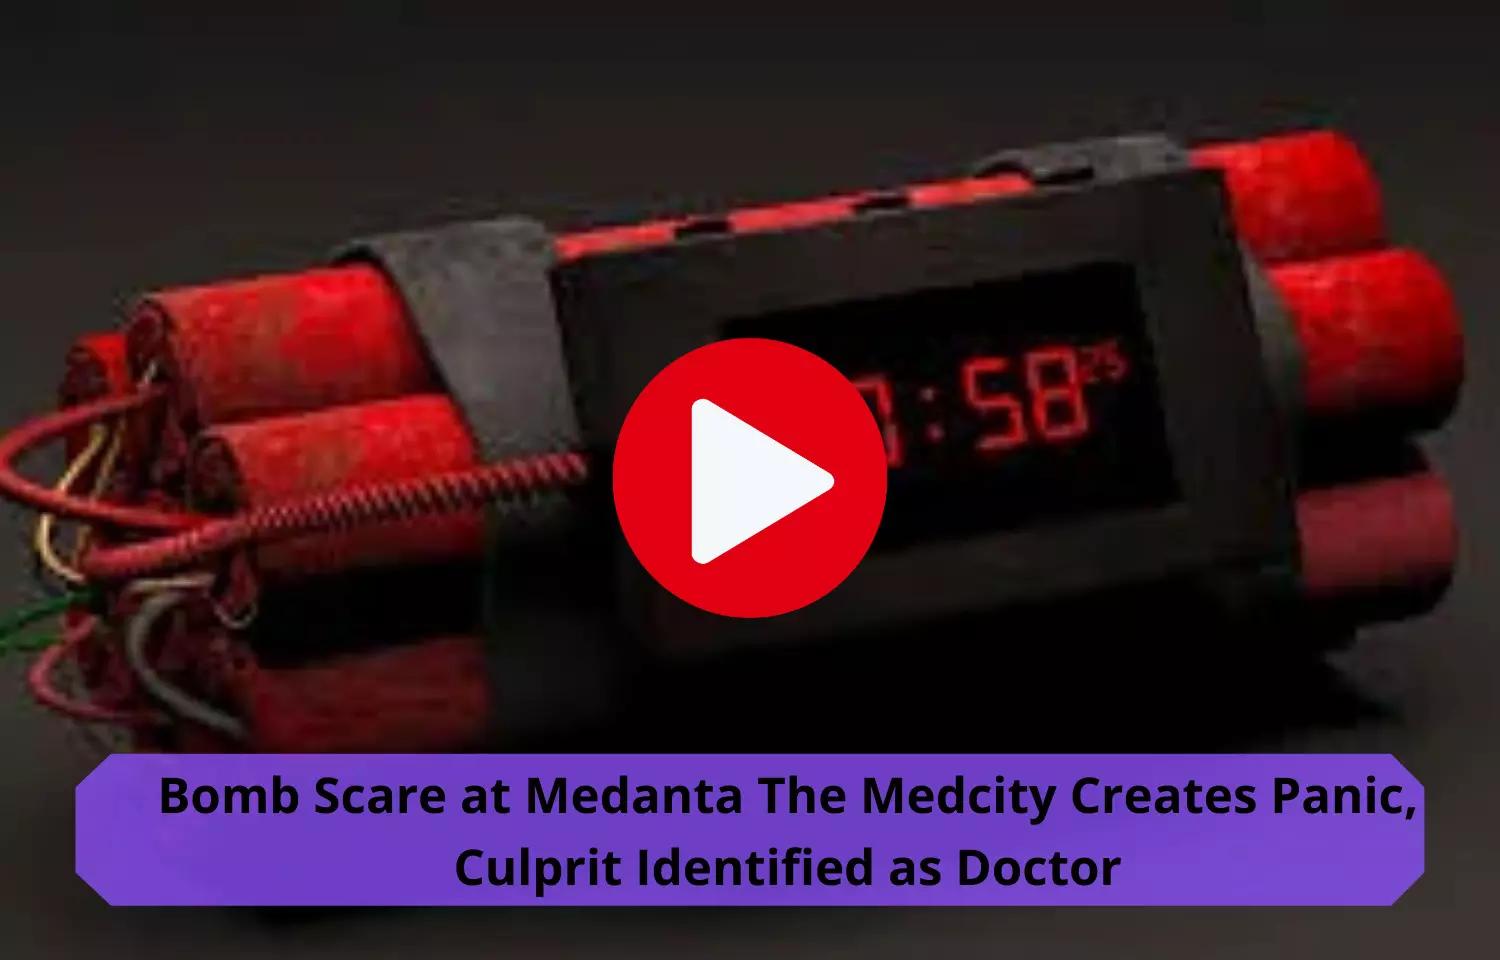 Bomb scare at Medanta- The Medcity creates panic, culprit identified as doctor